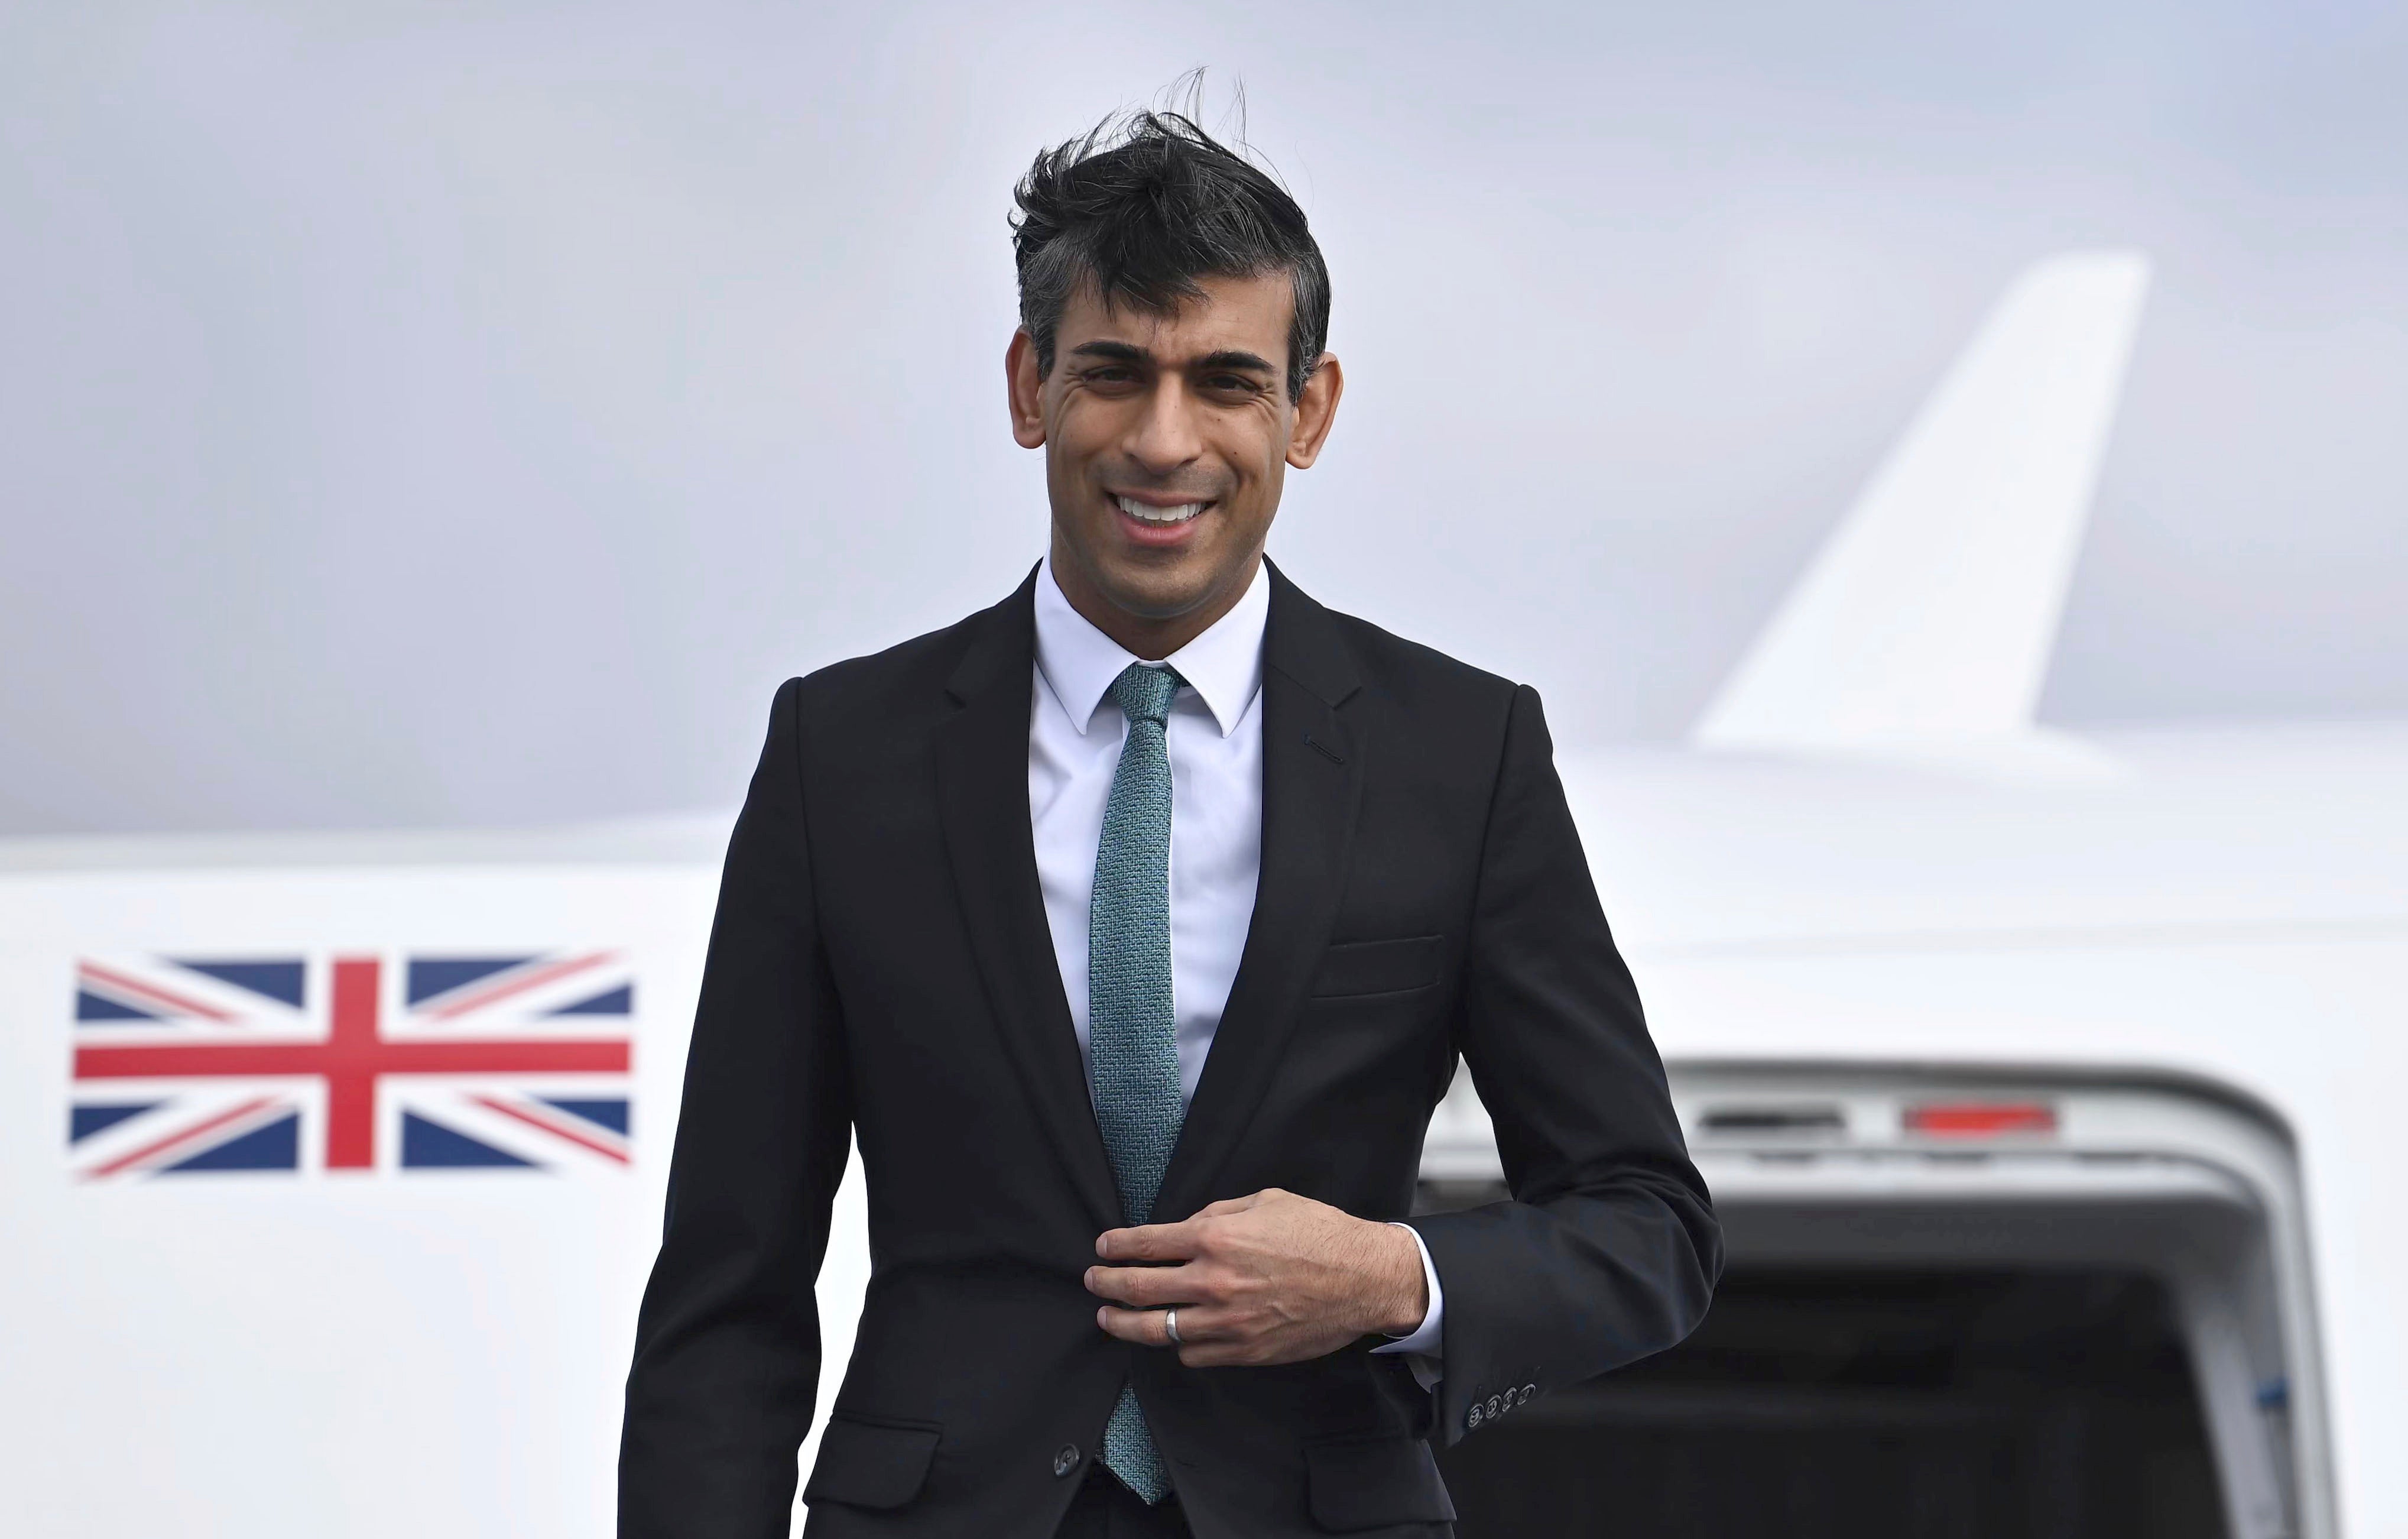 Rishi Sunak faces an uphill battle getting the DUP to back a new protocol deal